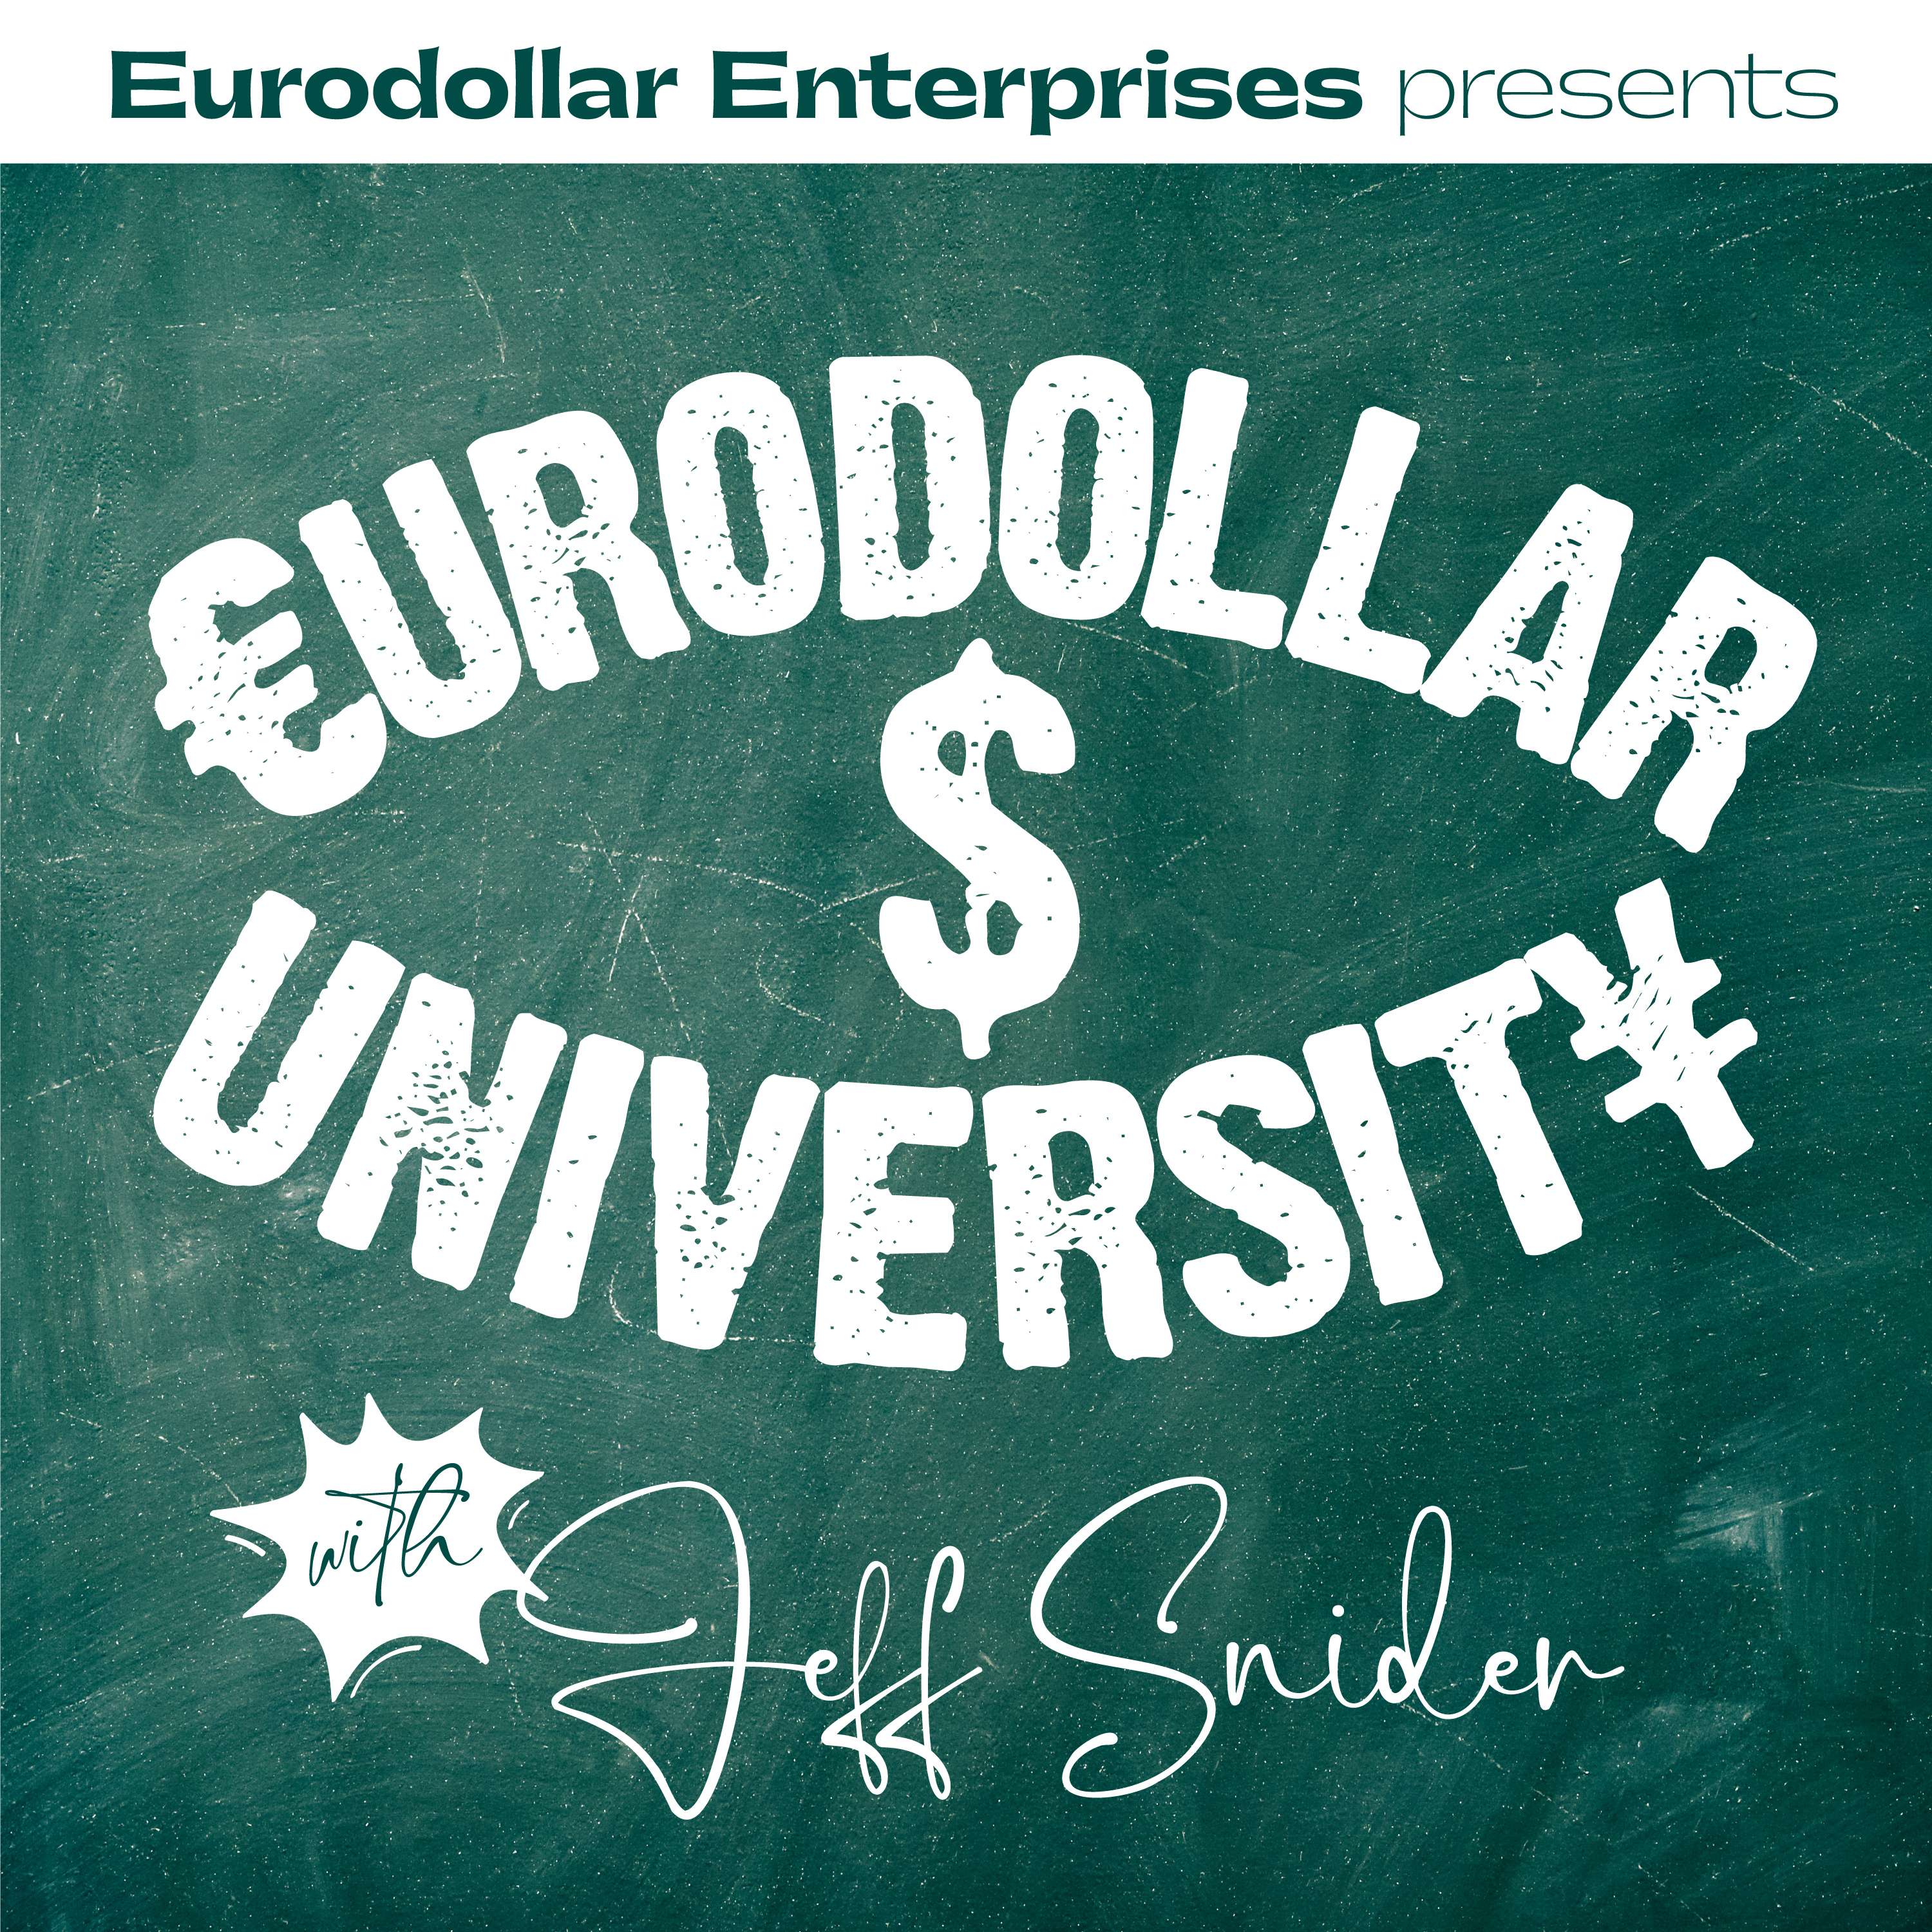 Reserve Currency is Constrained, say Swap Spreads [Eurodollar University, Ep. 195]